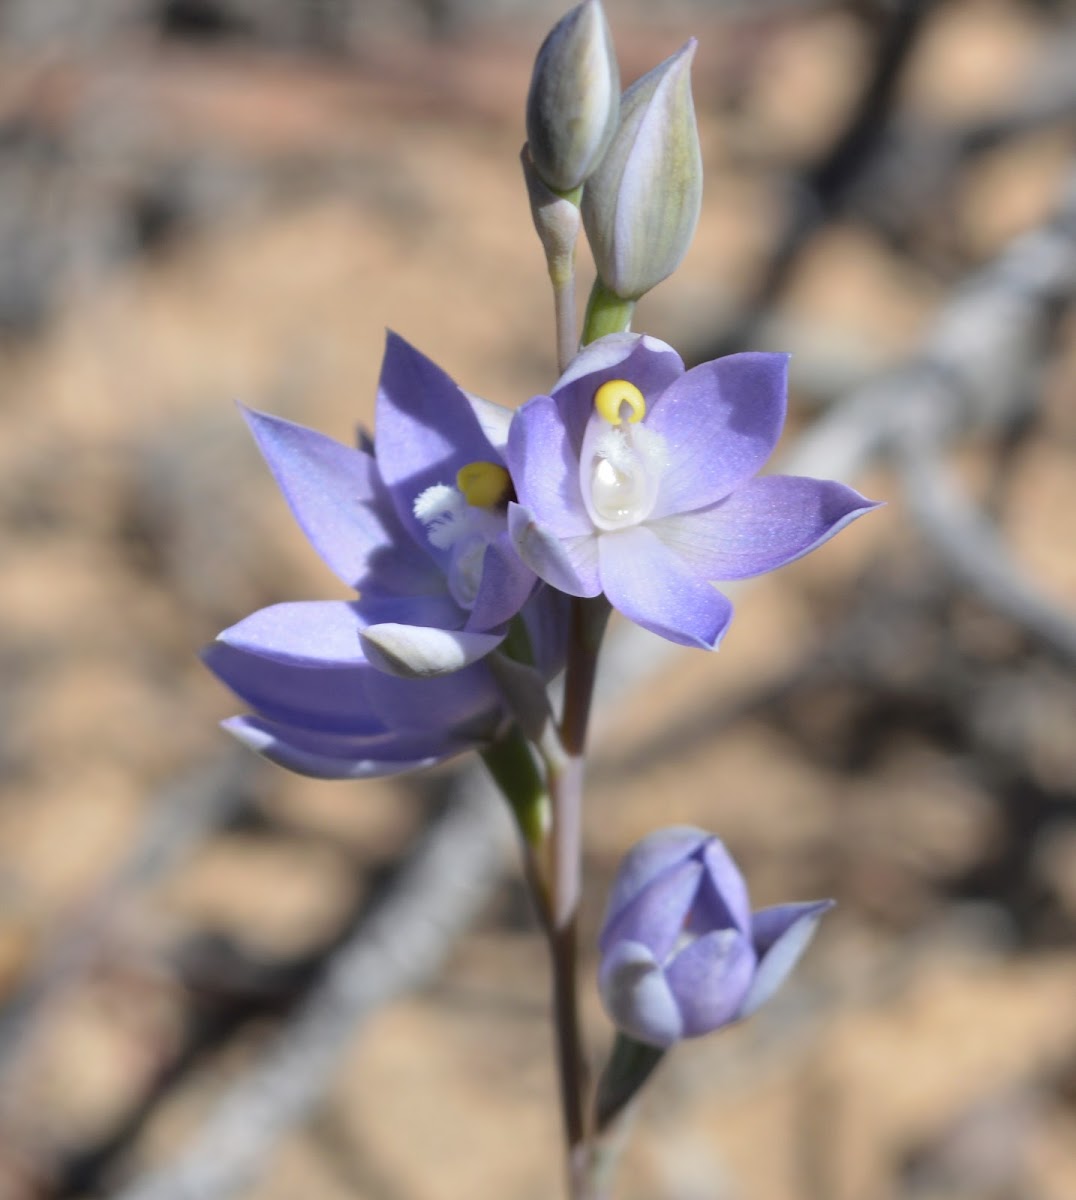 Scented sun orchid